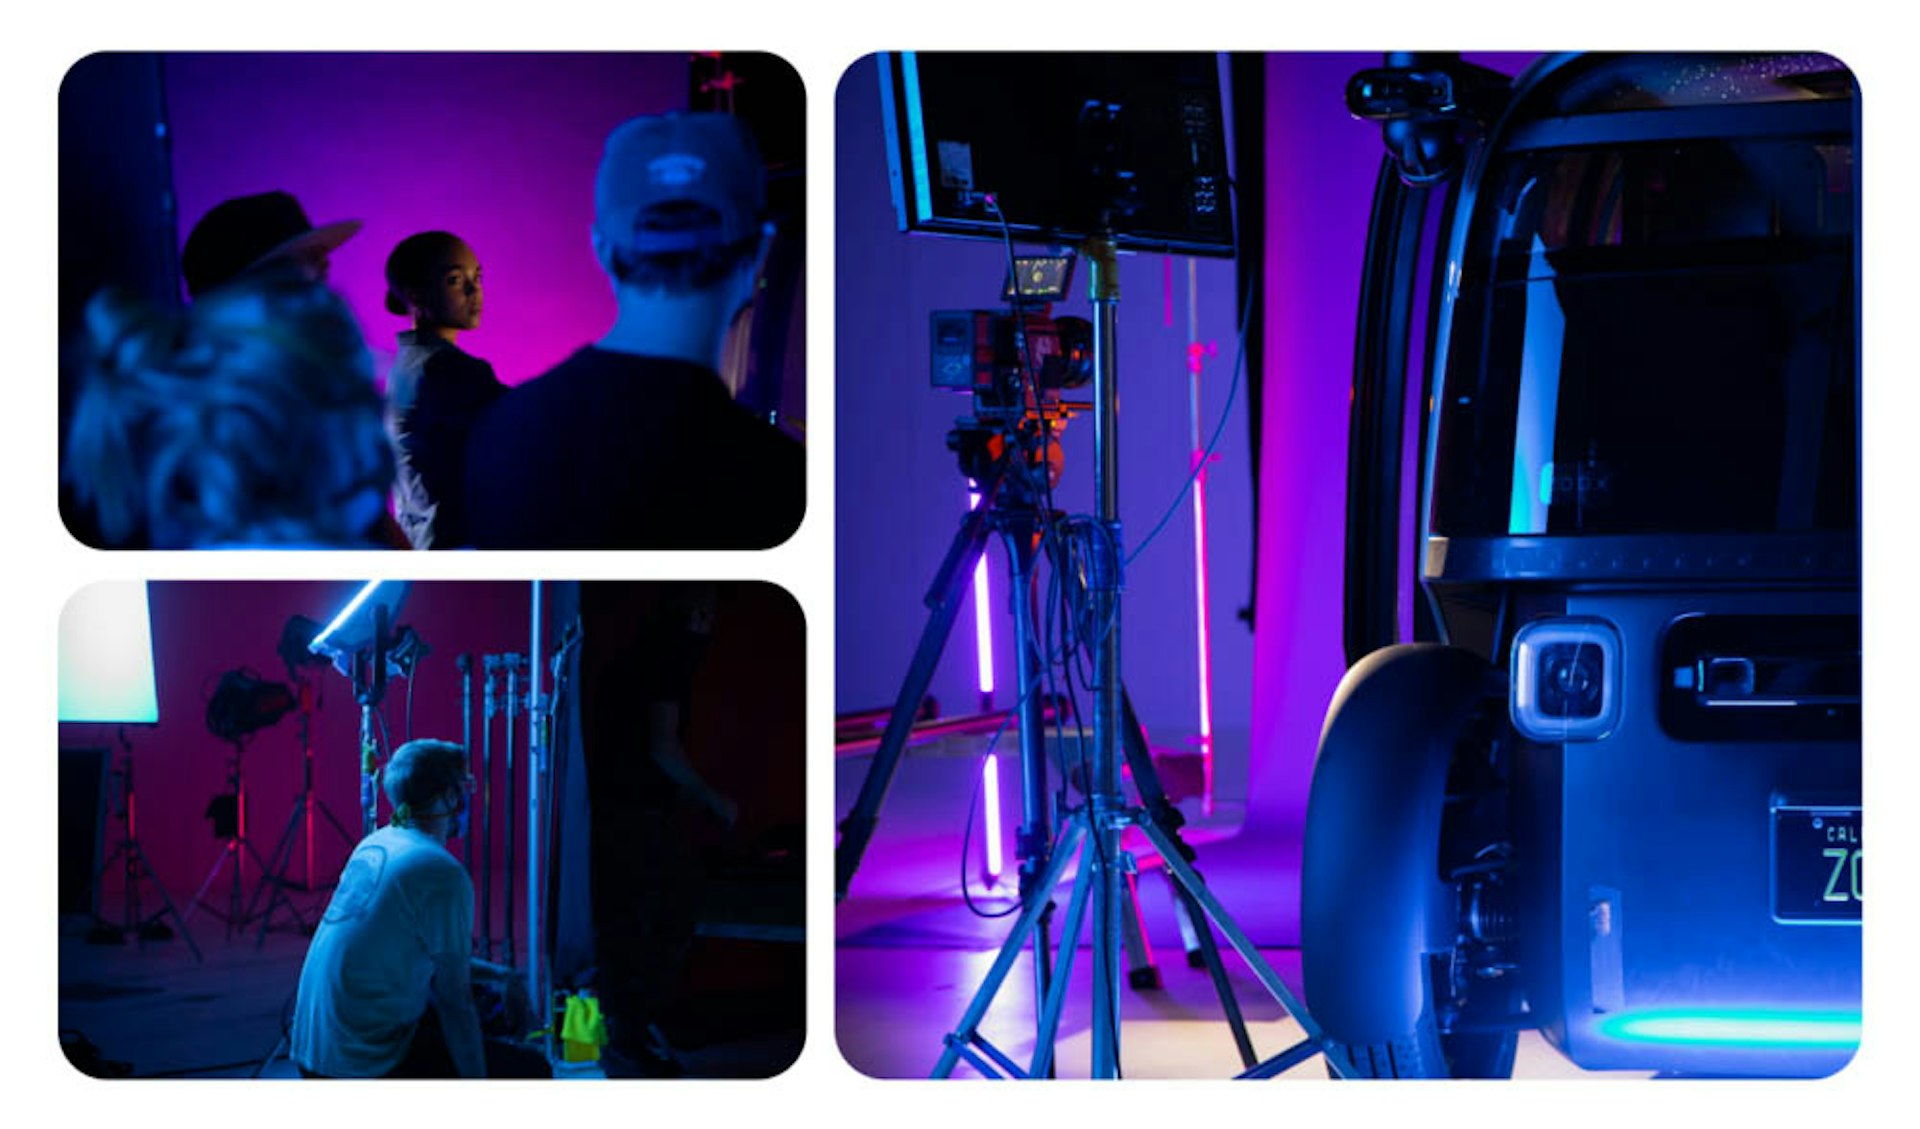 zoox reveal photoshoot with neon lights and the robotaxi and a woman behind the scenes